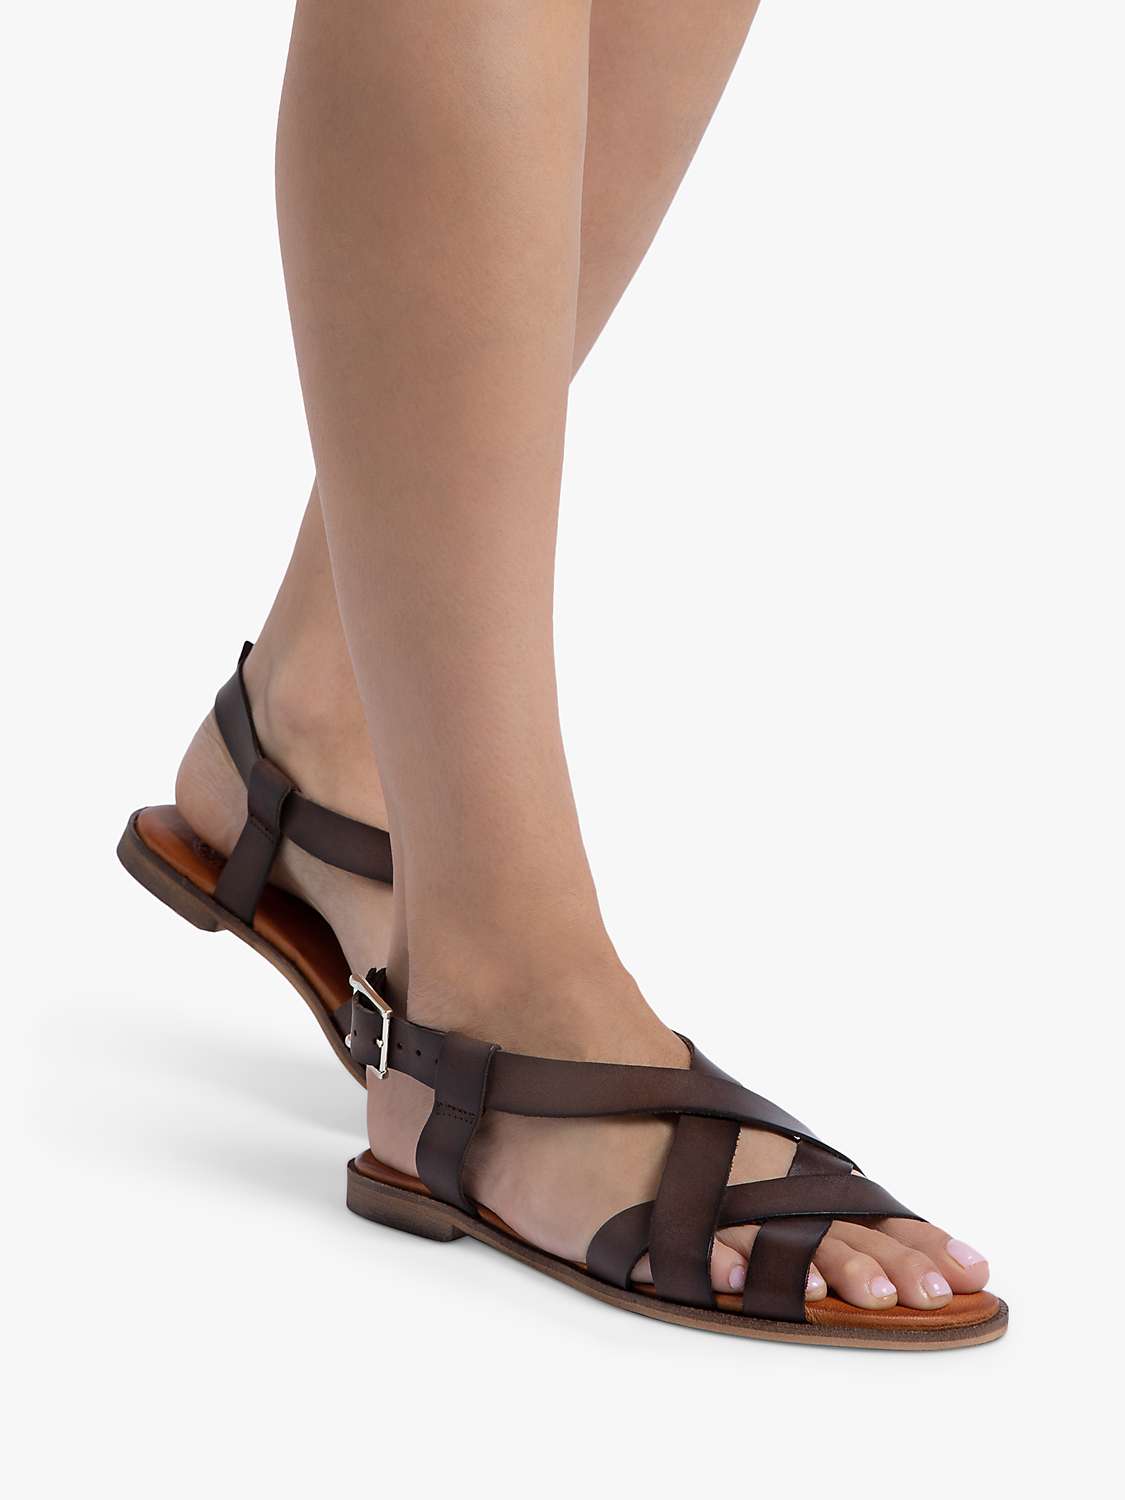 Buy Penelope Chilvers Buttercup Leather Sandals, Chocolate Online at johnlewis.com